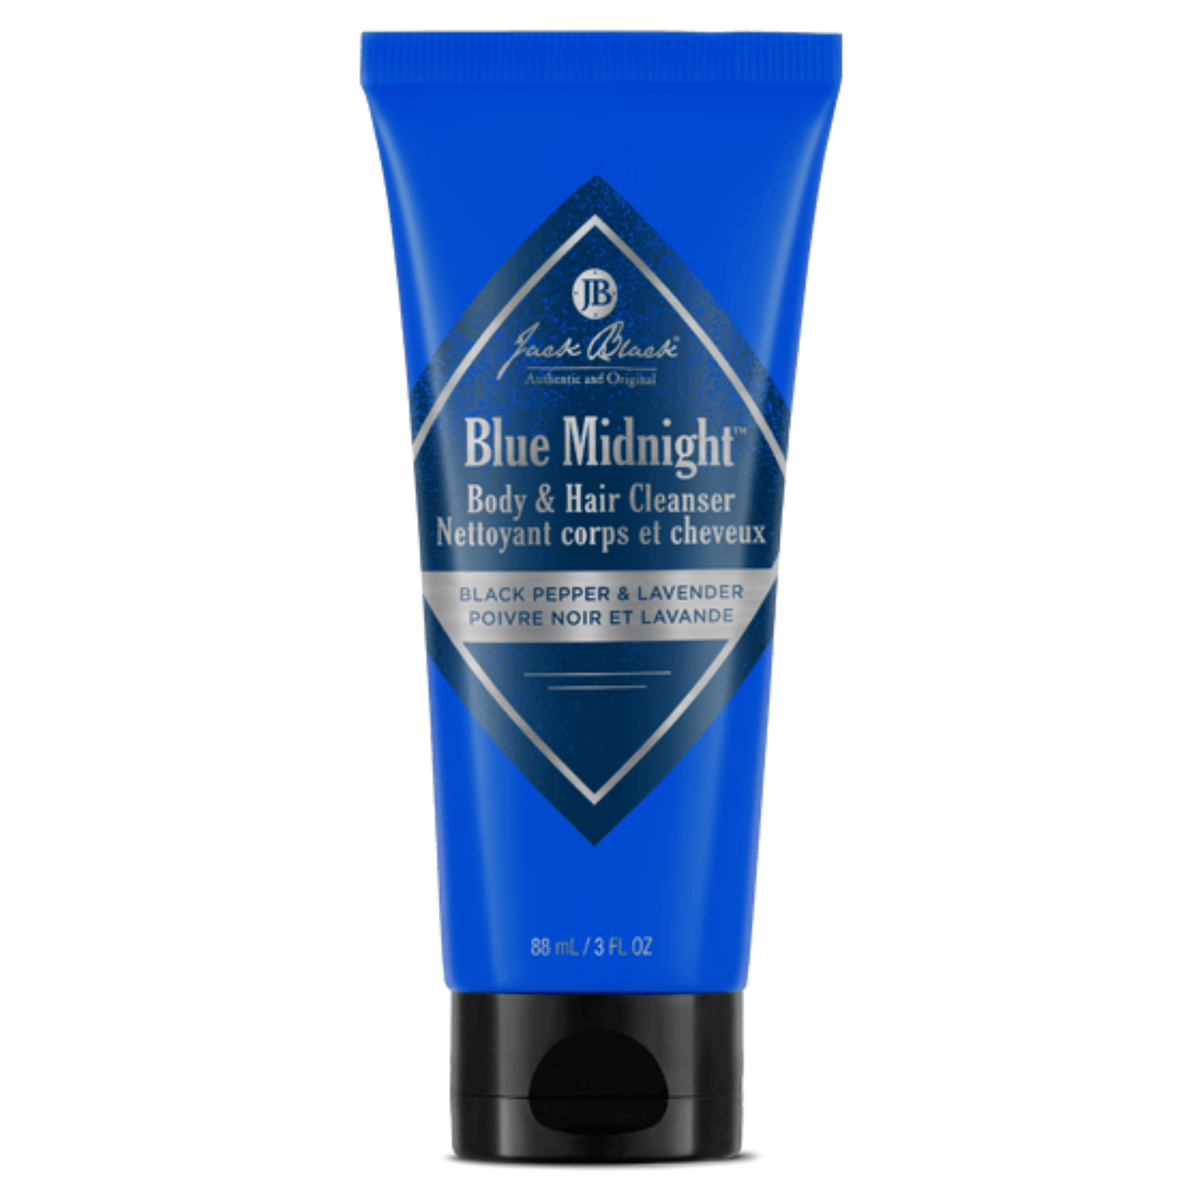 Primary Image of Blue Midnight Cleanser for Body & Hair